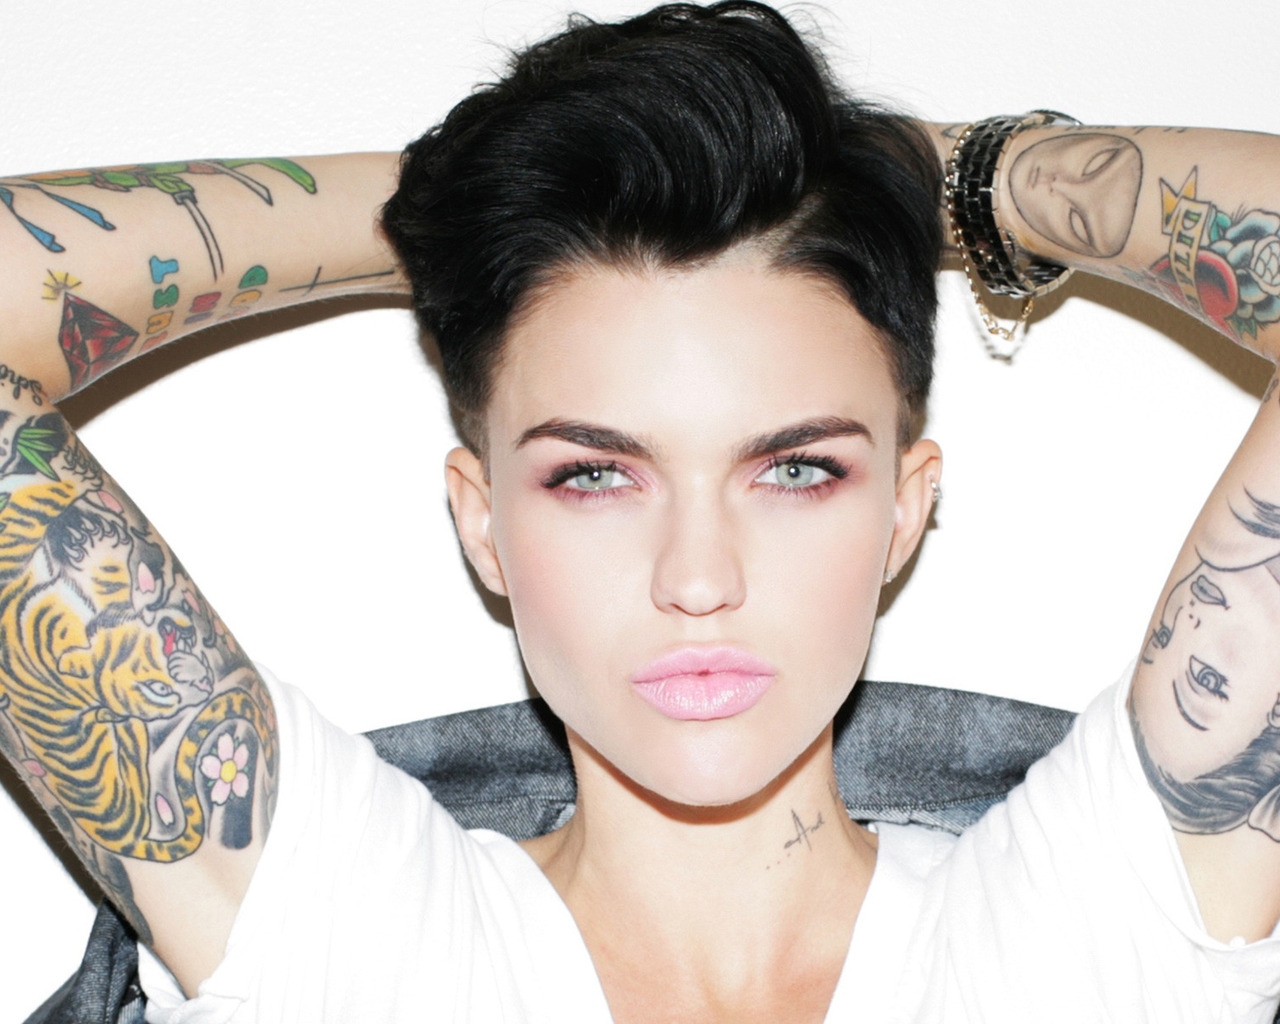 Ruby Rose Tattoos for 1280 x 1024 resolution